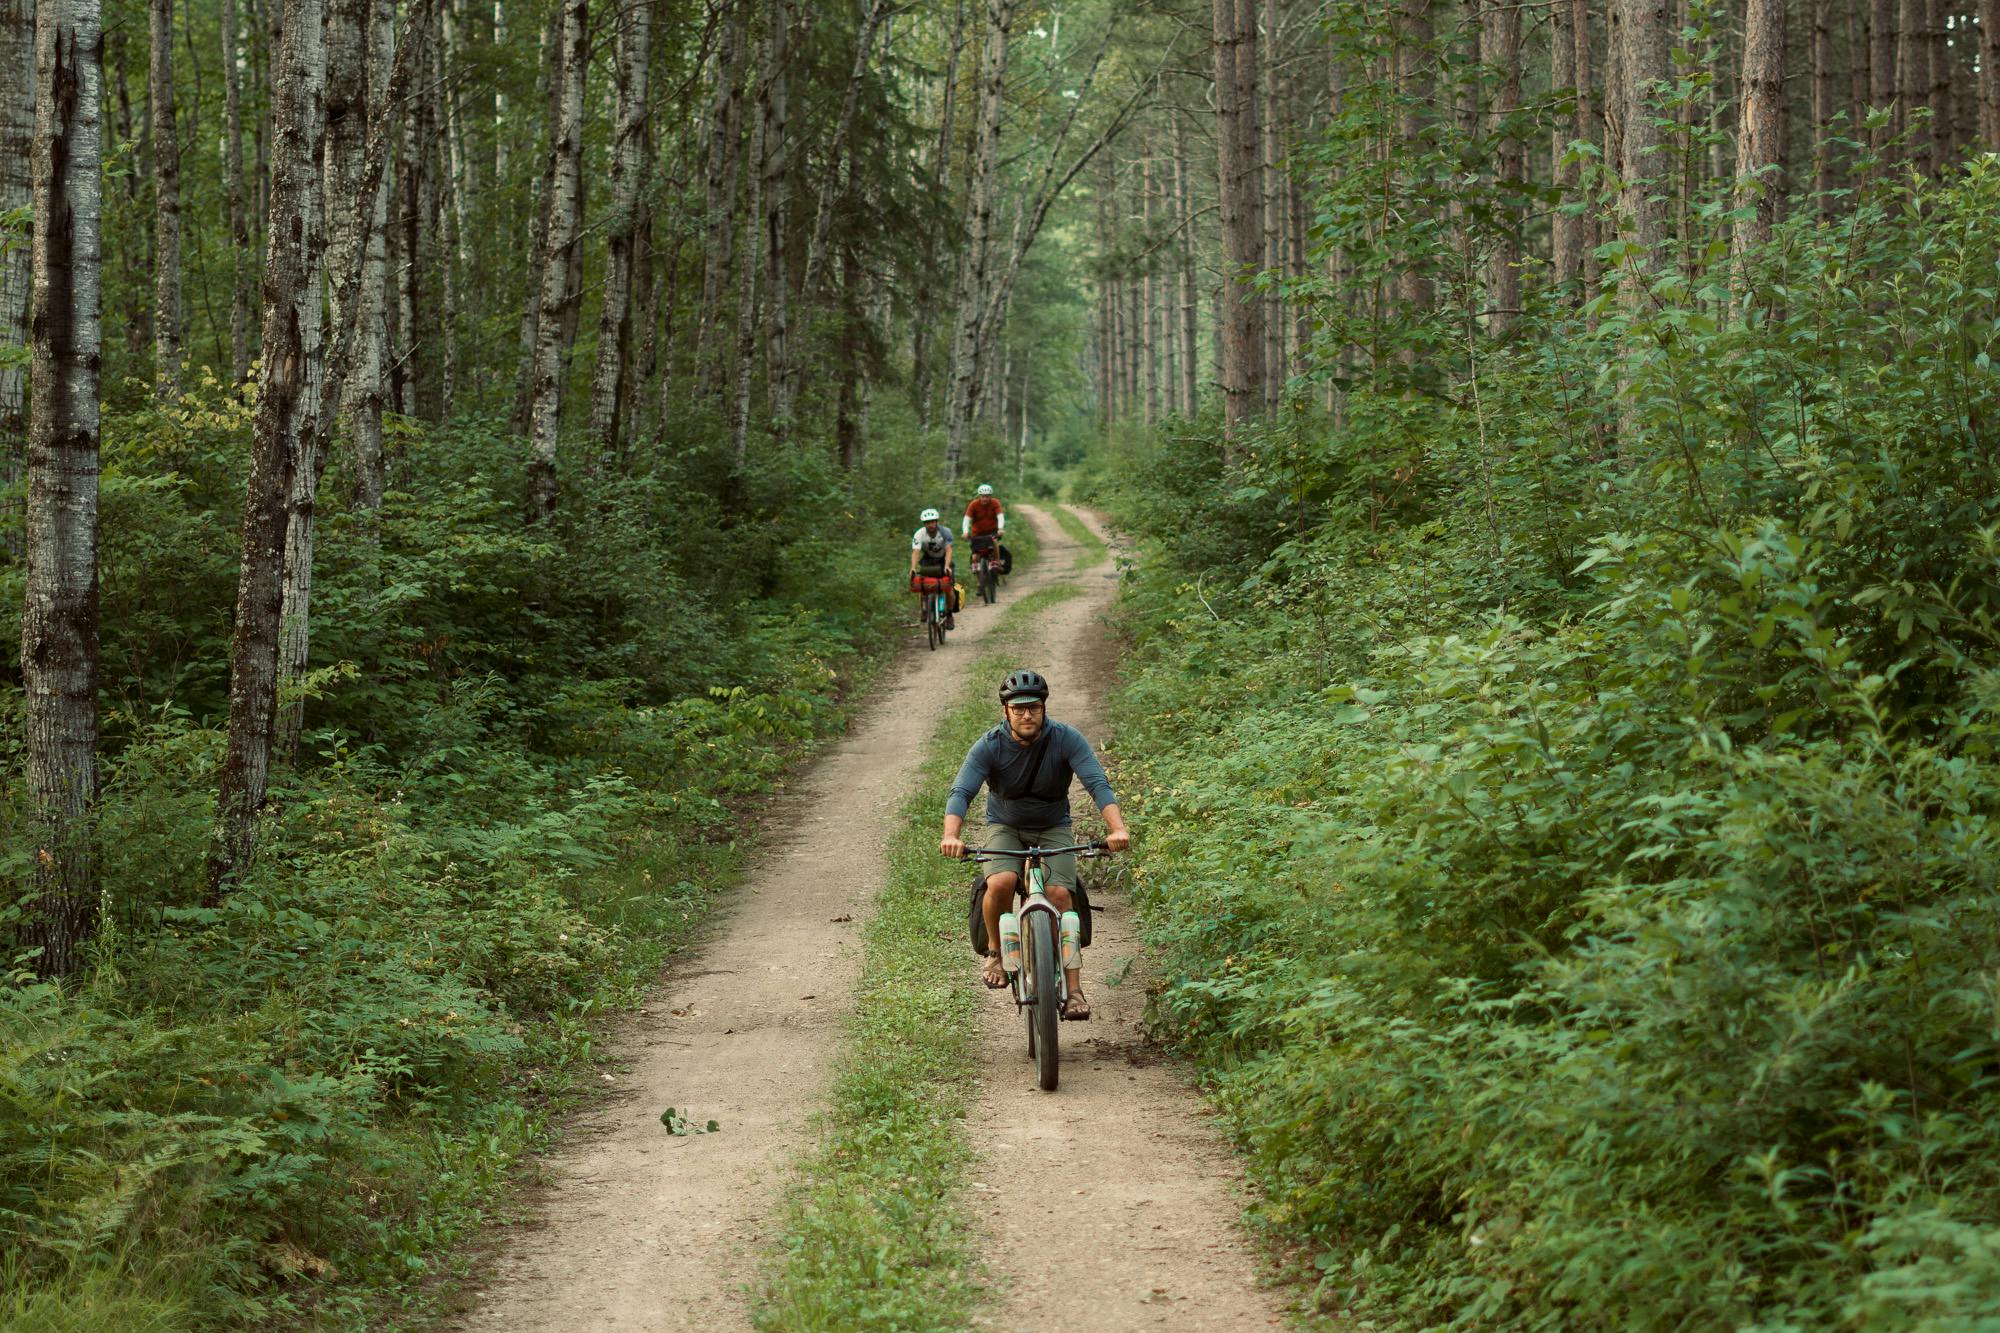 Riding the Itasca Bikepacking route.